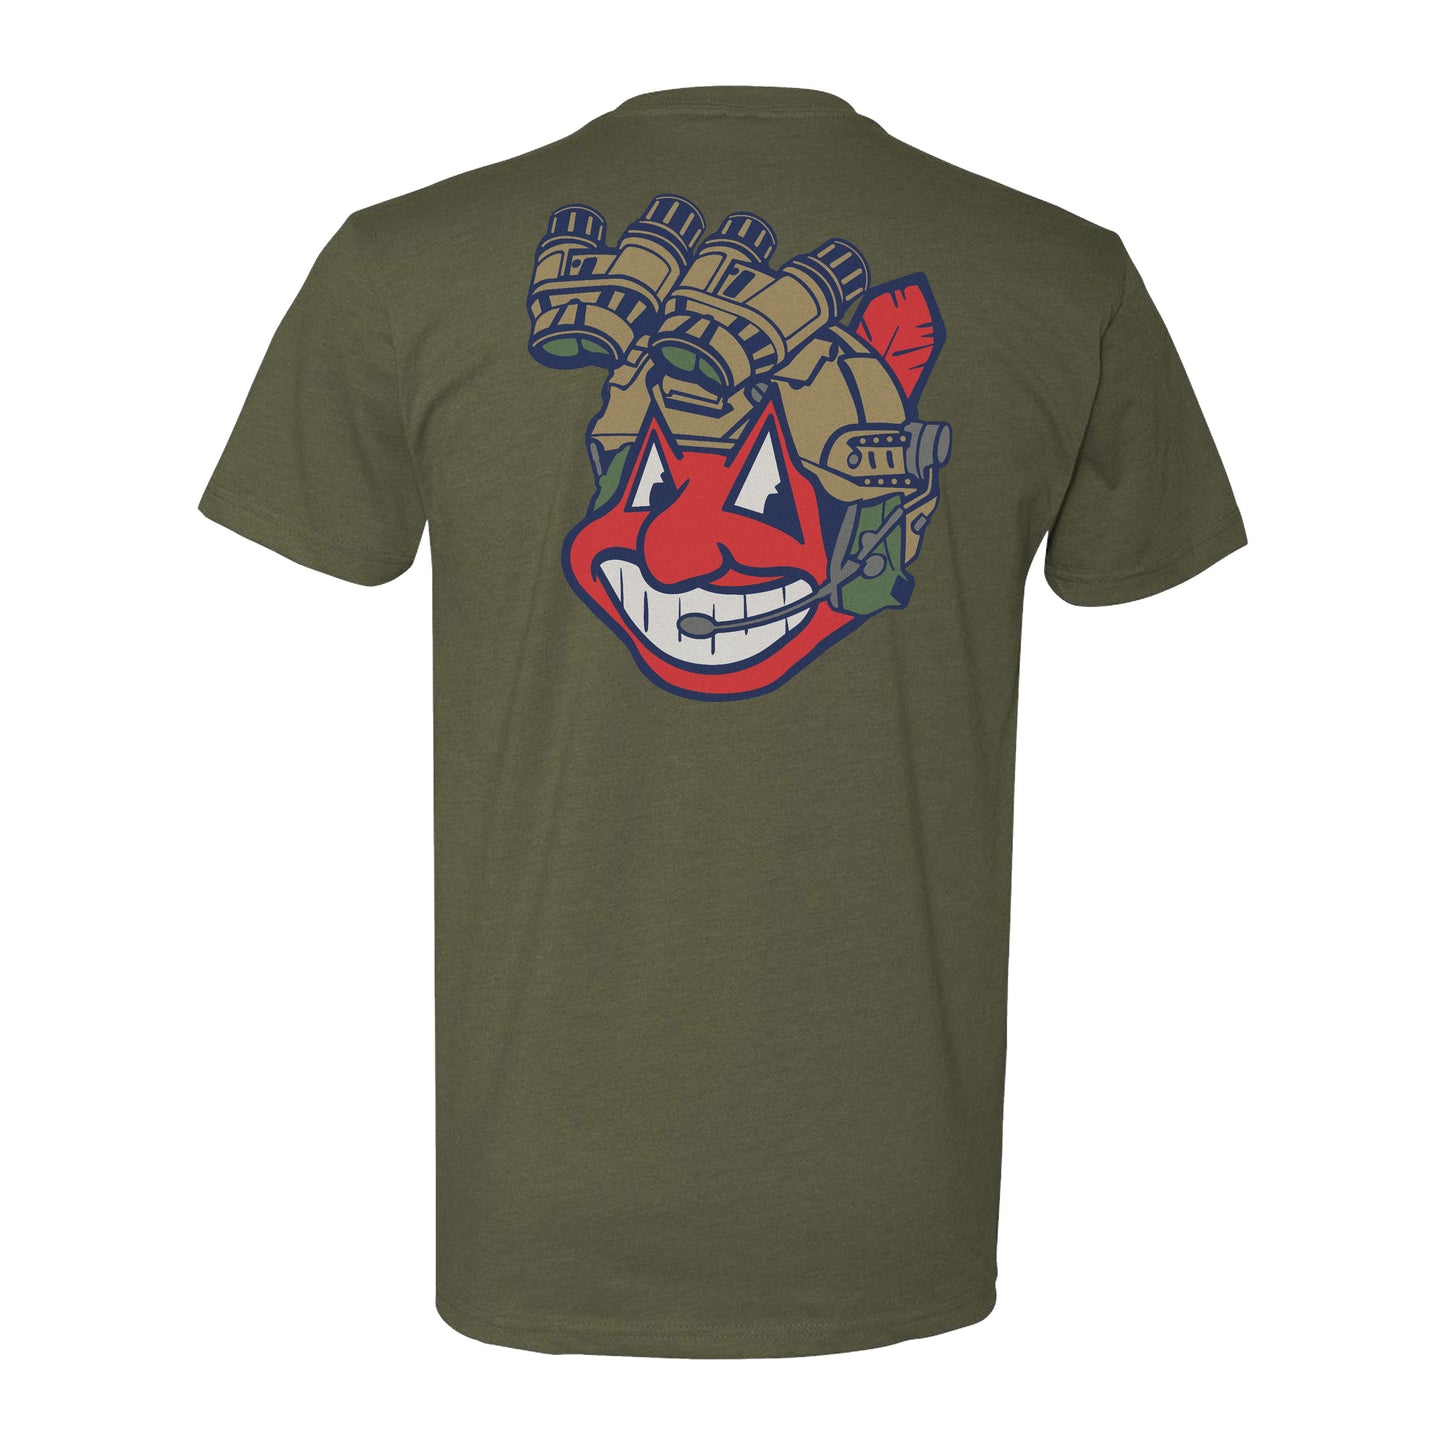 Buy Cleveland Indians Shirt Online In India -  India